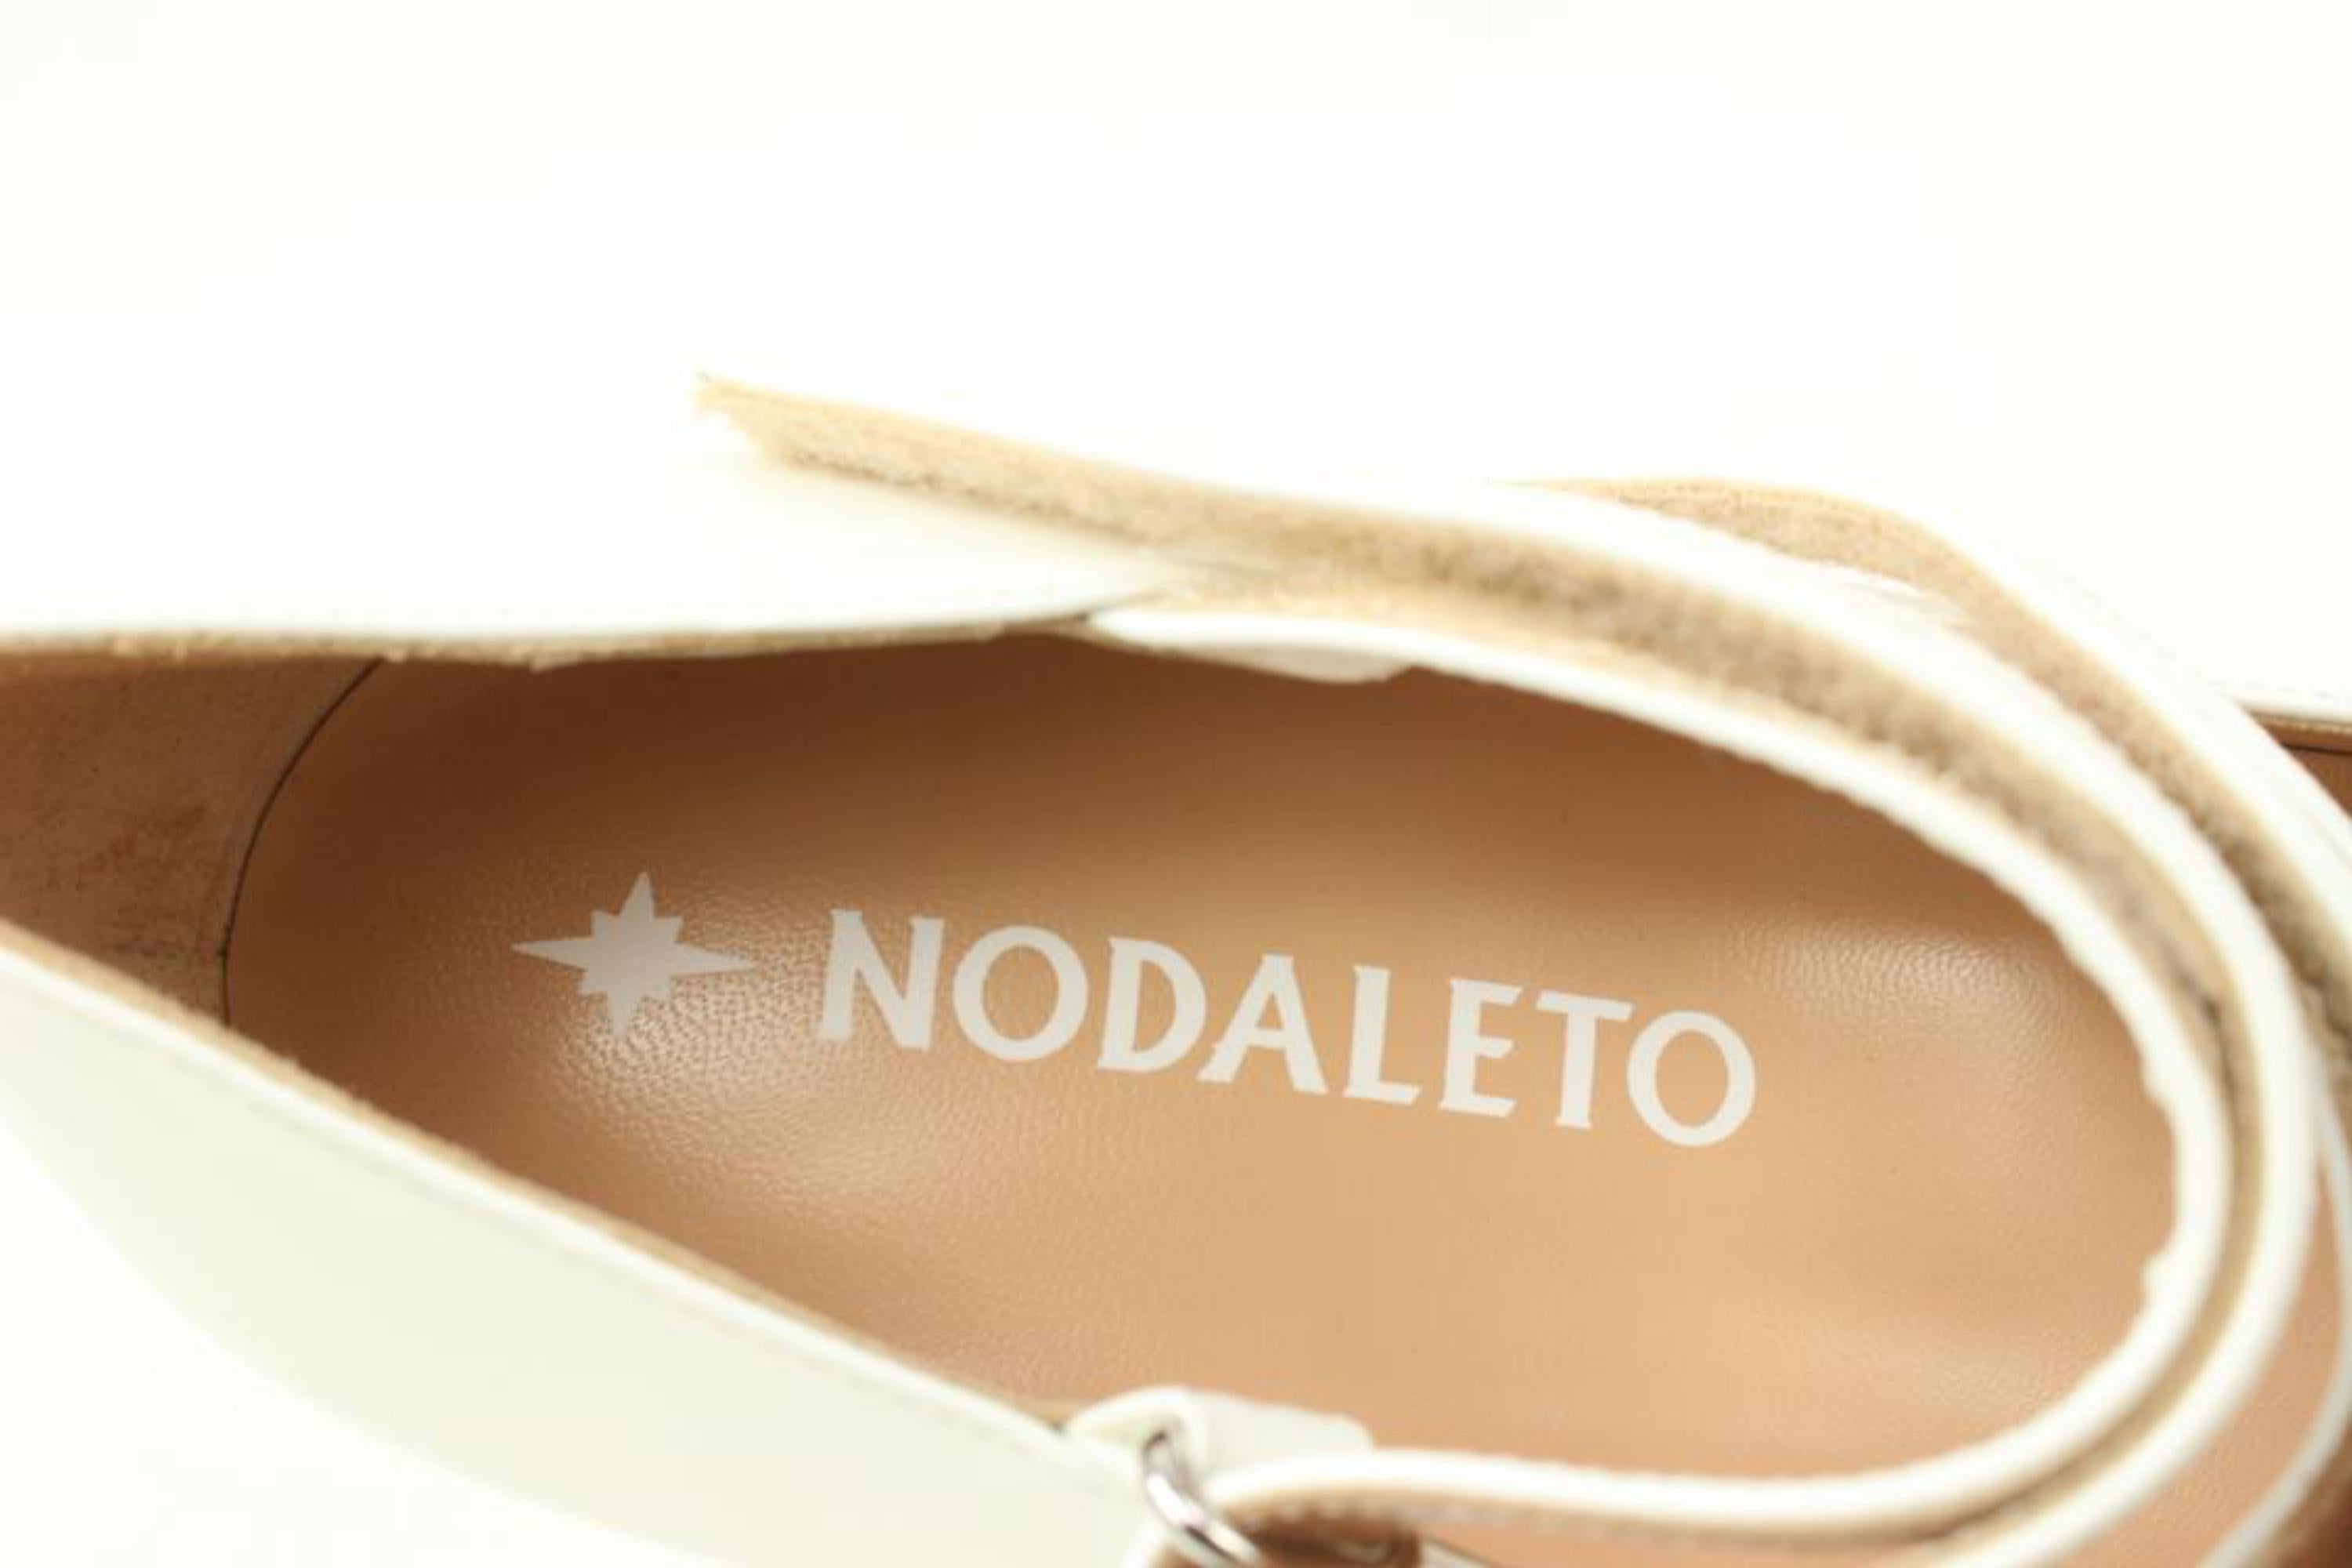 Nodaleto Size 40 Ceramic Patent Leather Bulla Babies Platforms 47n321s
Made In: Venice
Measurements: Length:  10.5